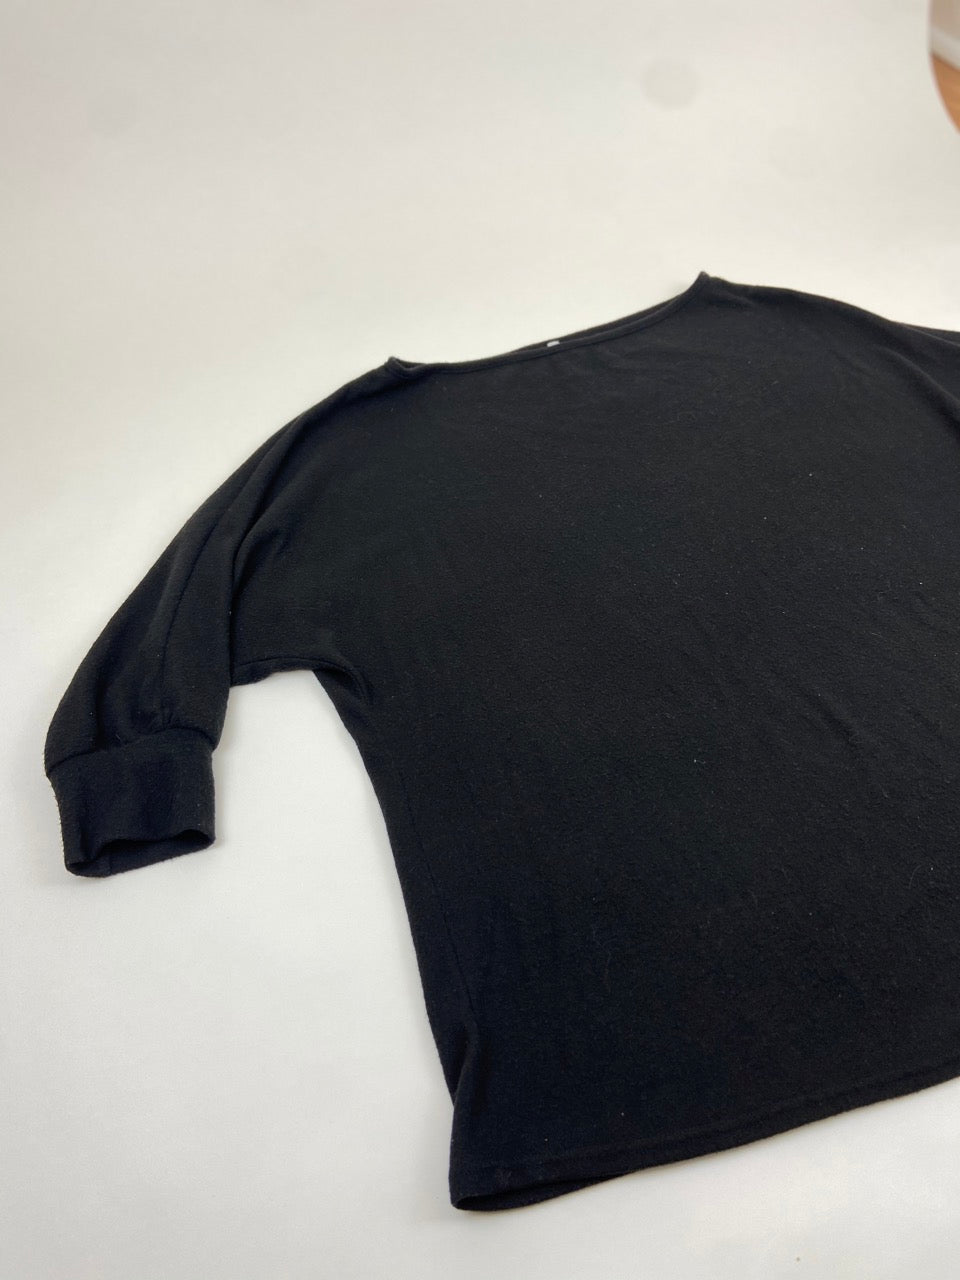 Cozy Black Off The Shoulder Sweater- 3X